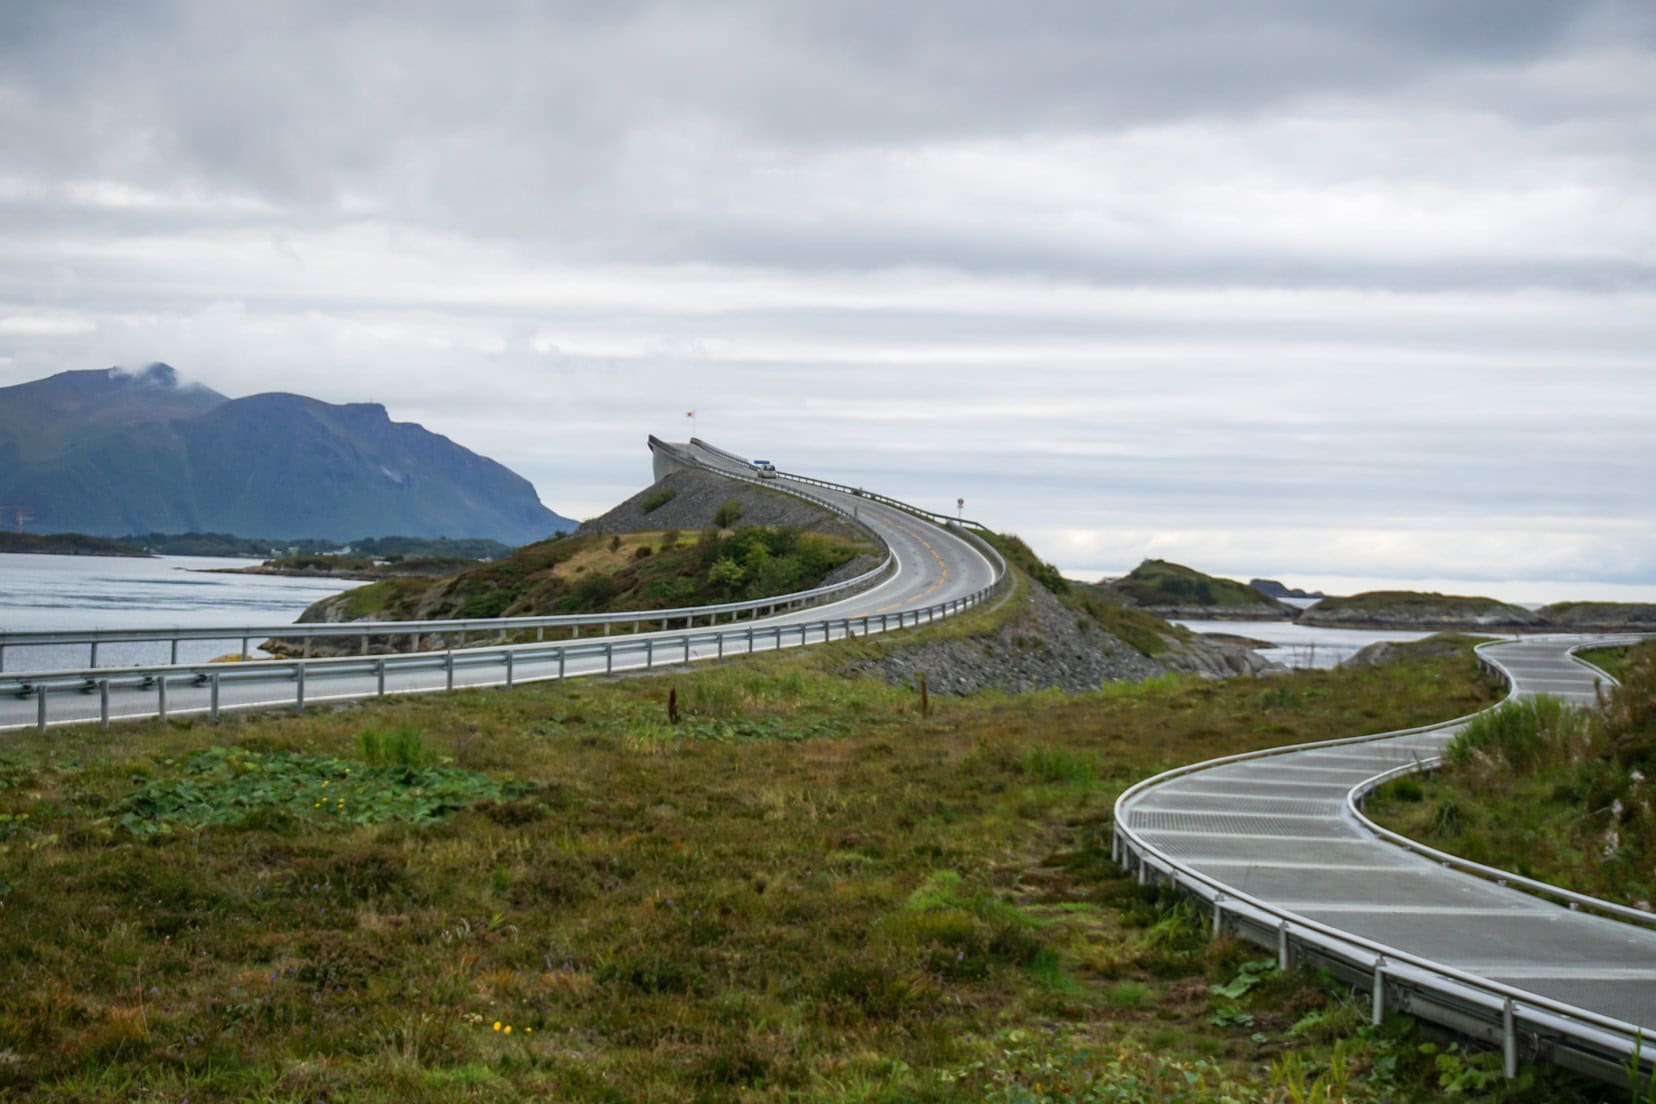 The Atlantic Road sweeping curves 